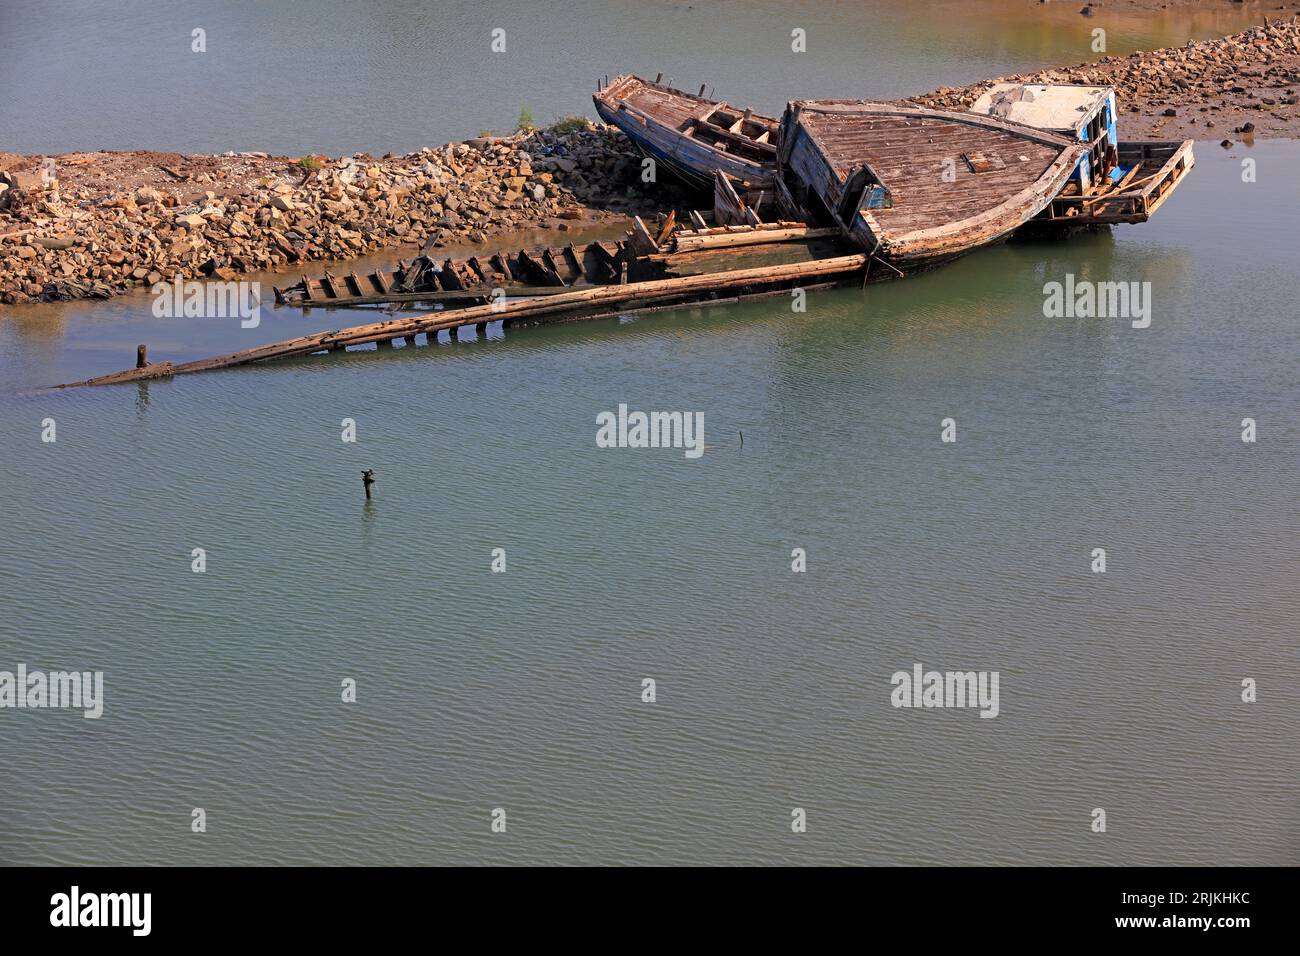 Wrecked wooden fishing boat wreckage Stock Photo